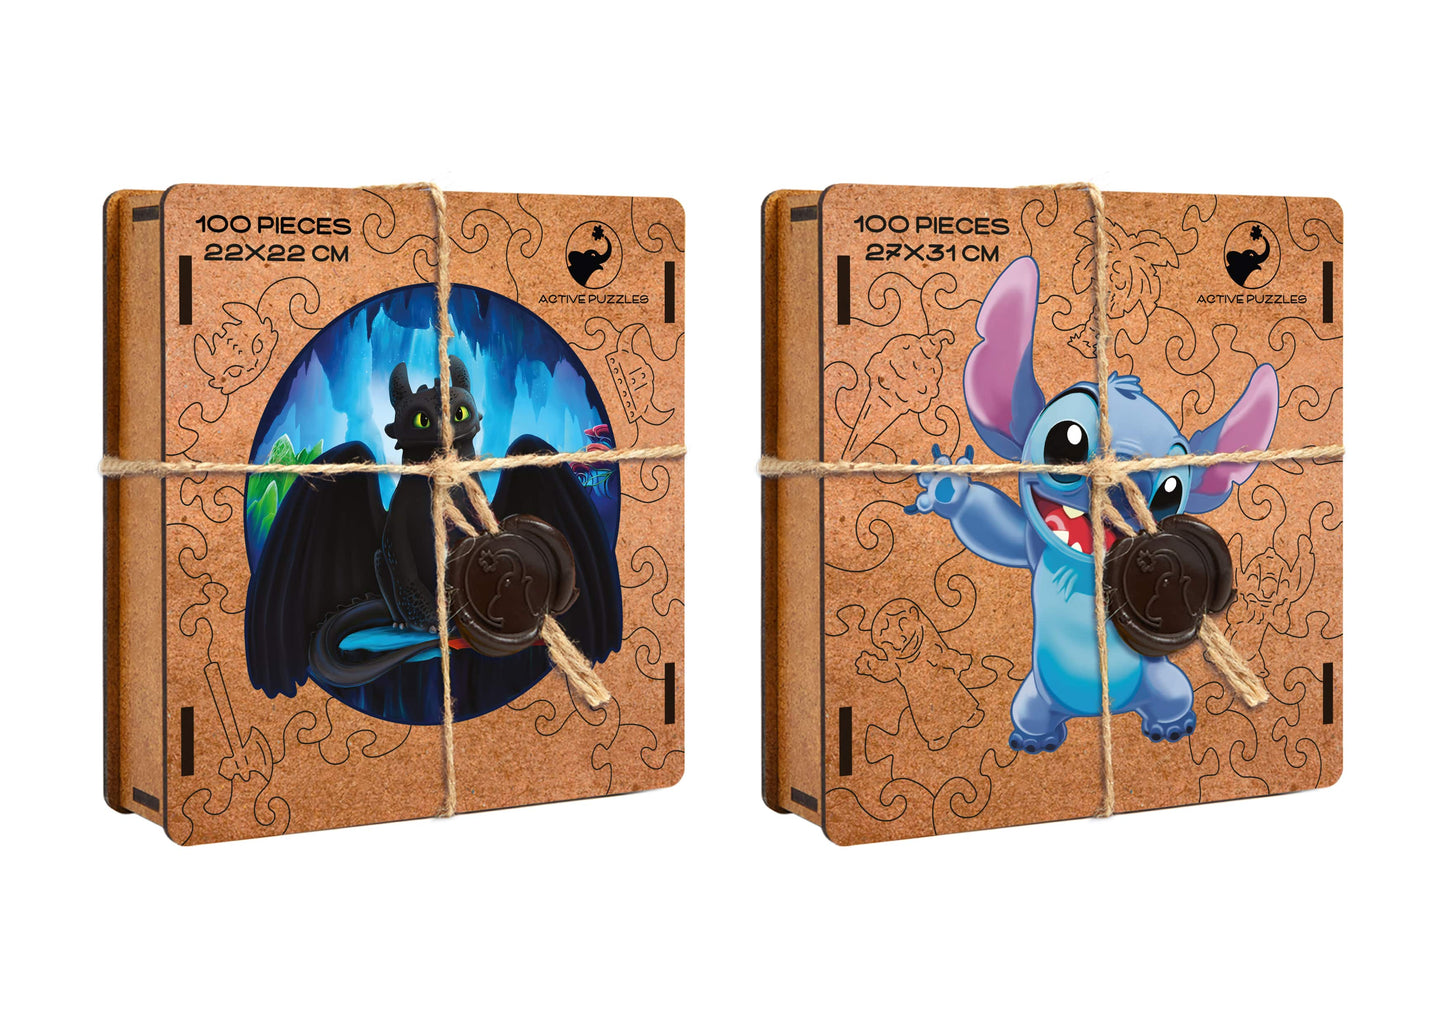 Toothless & Stitch Wooden Special Premium Pack of 2 Puzzles Active Puzzles